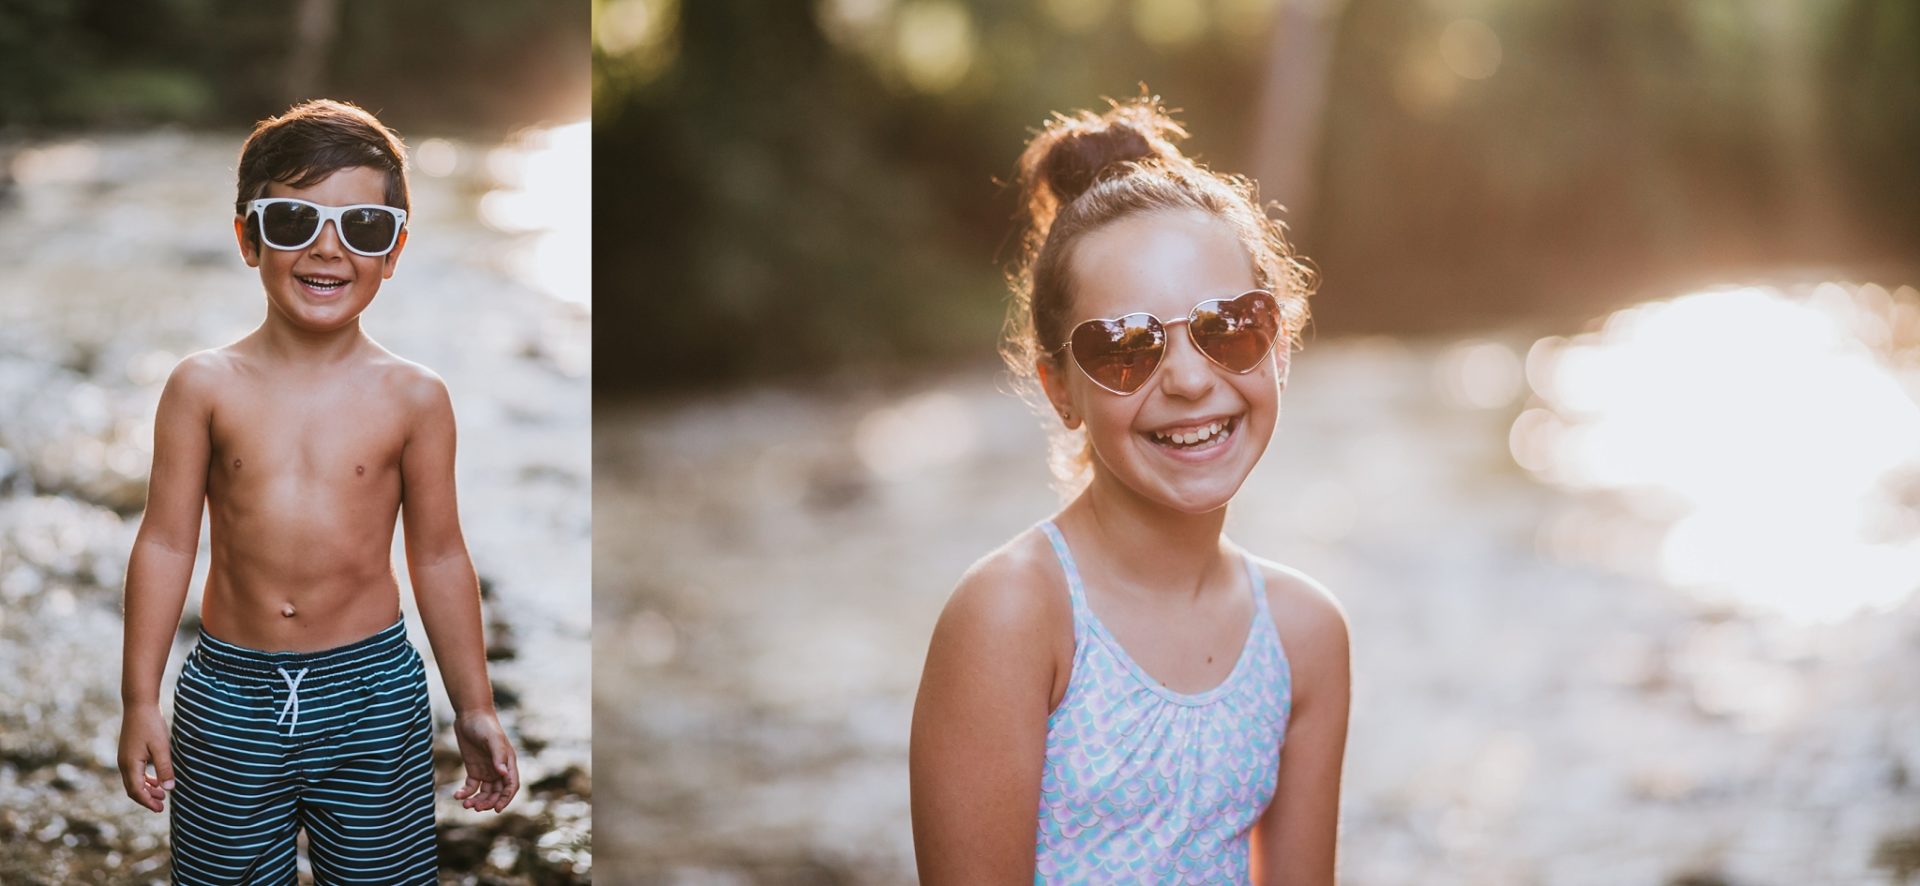 Outdoor Photo Session | Potomac MD Baby and Family Photographer